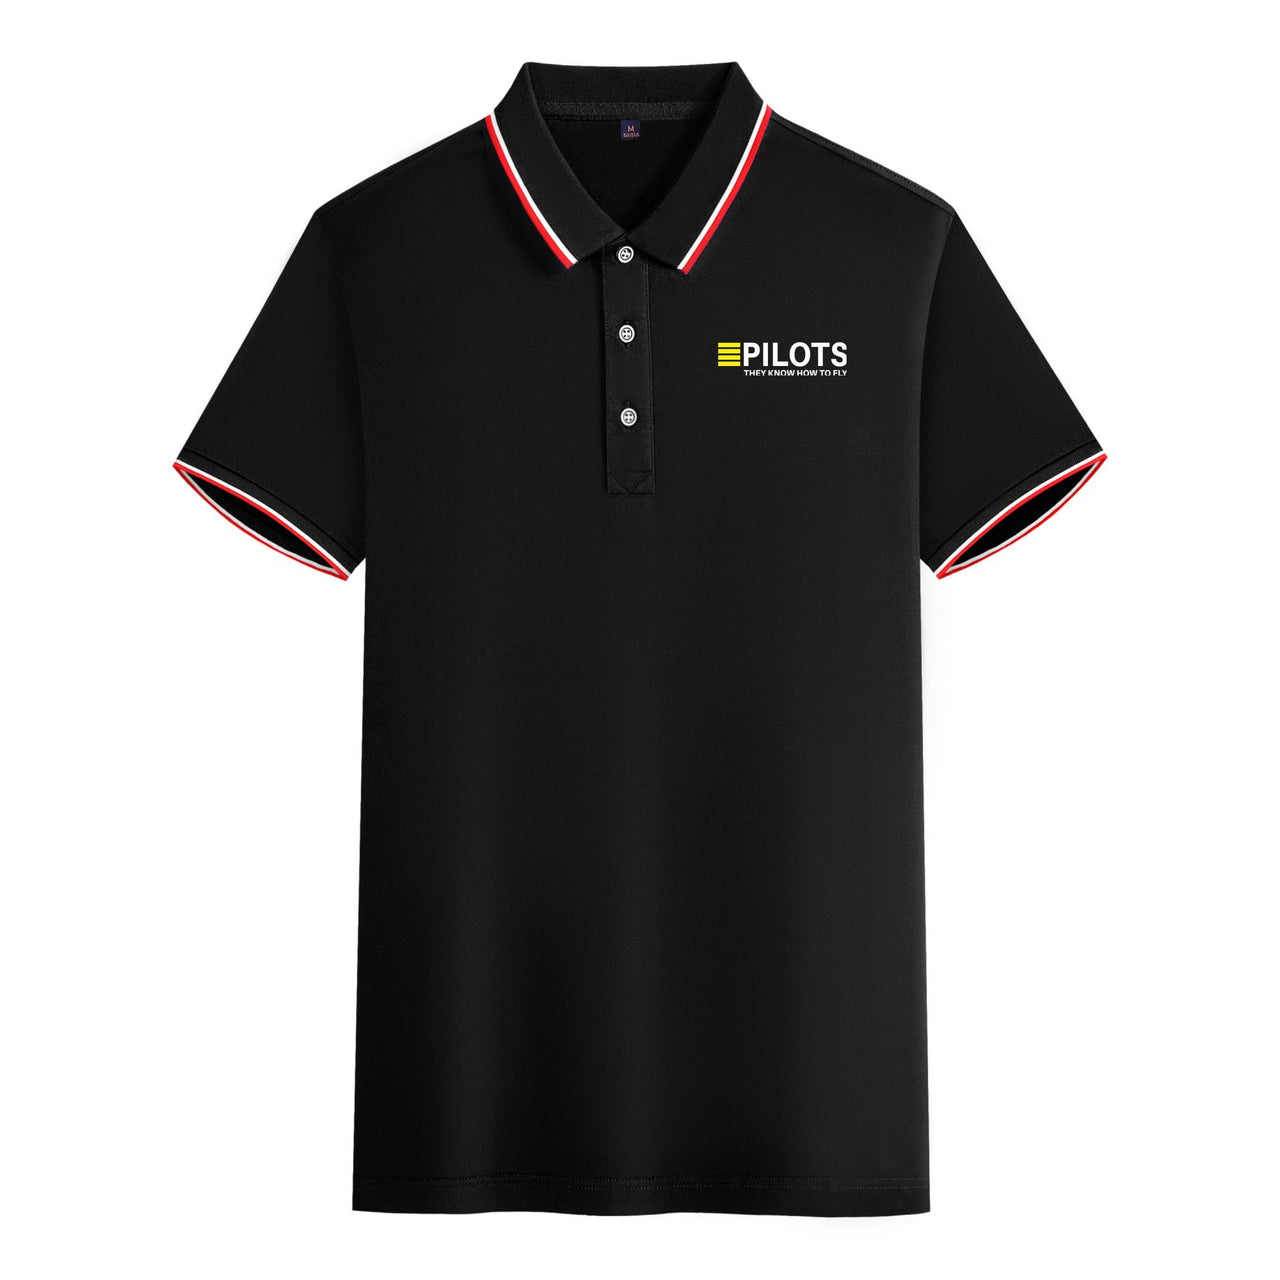 Pilots They Know How To Fly Designed Stylish Polo T-Shirts